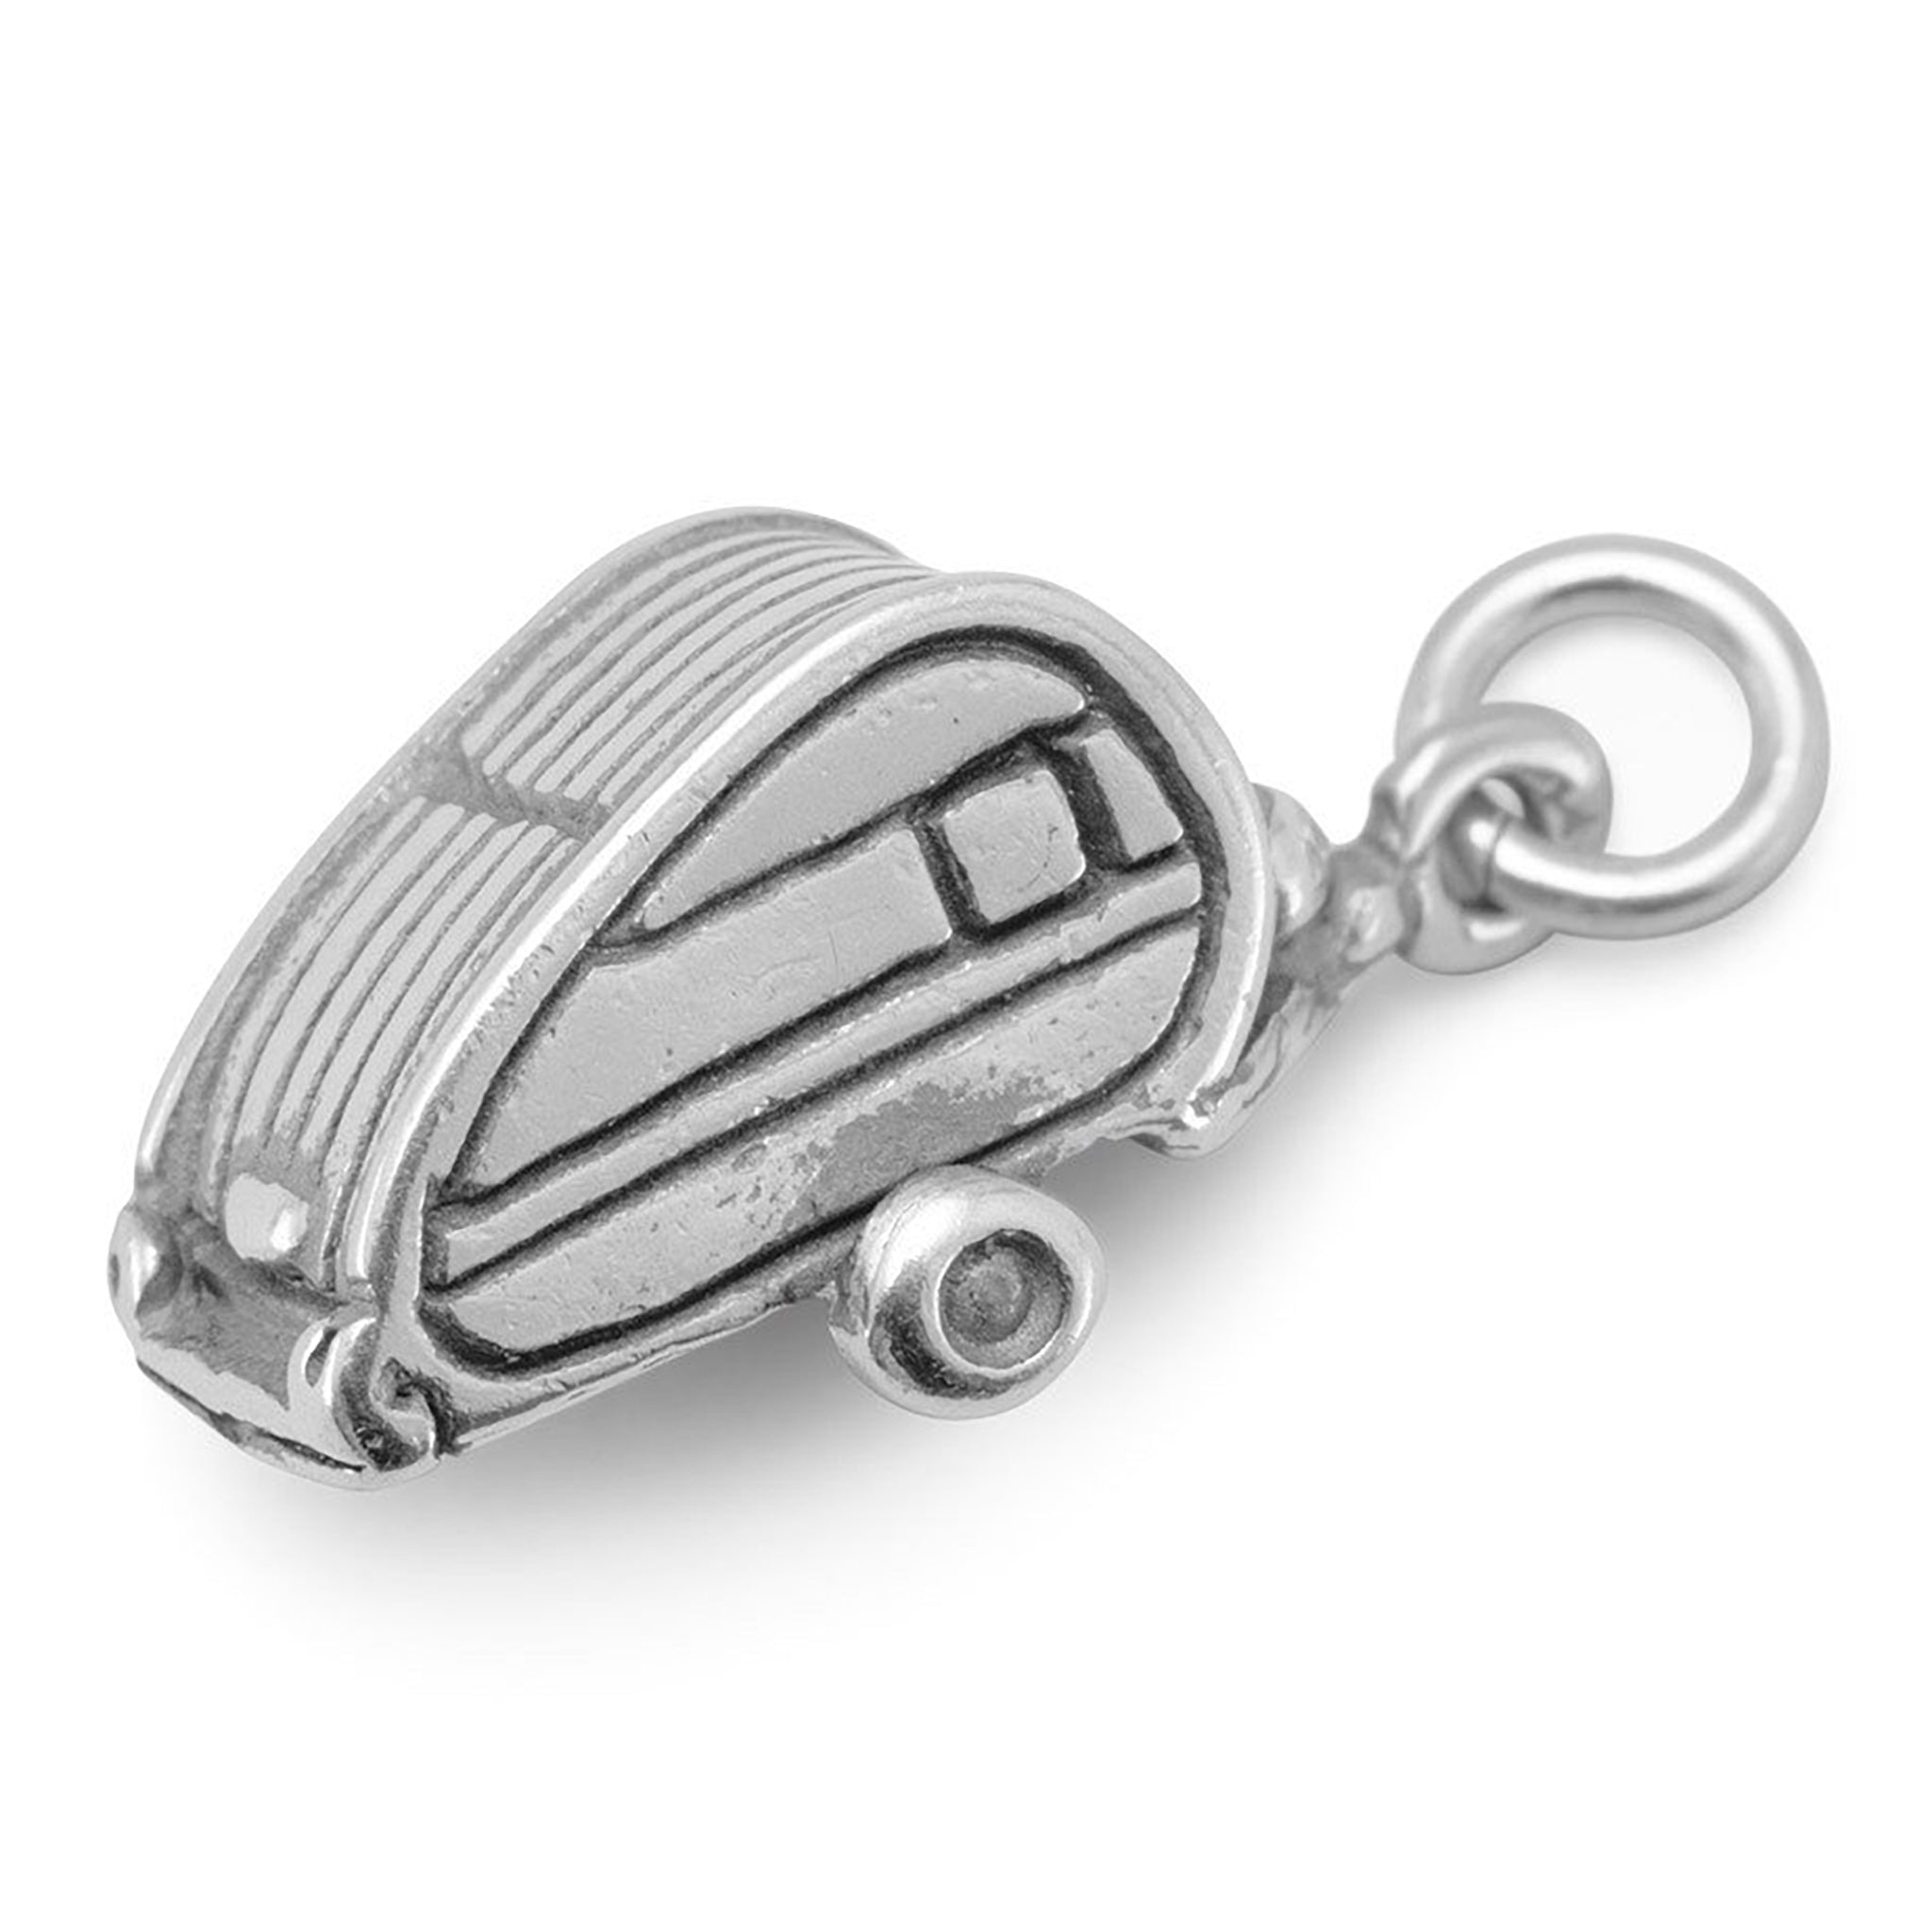 Camping Travel Trailer Charm